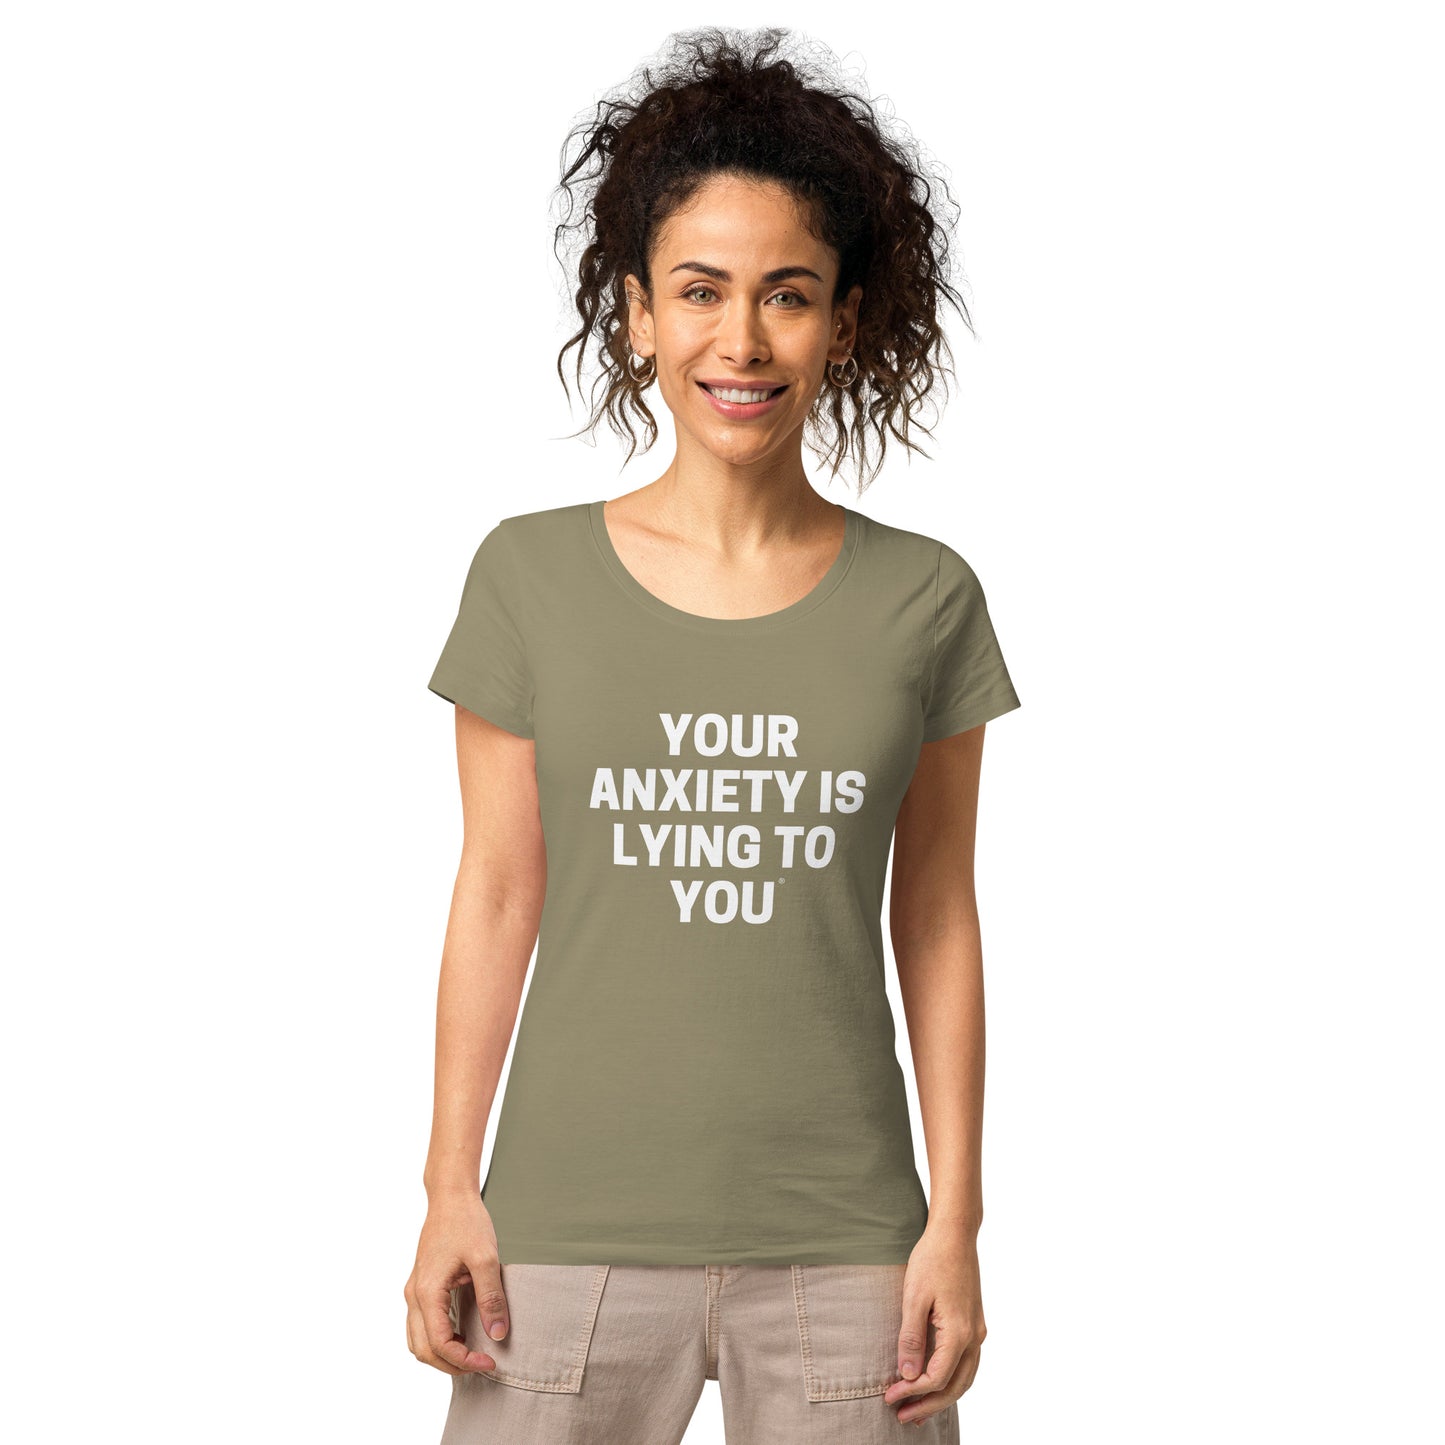 Your Anxiety is lying to you- Women’s basic organic t-shirt